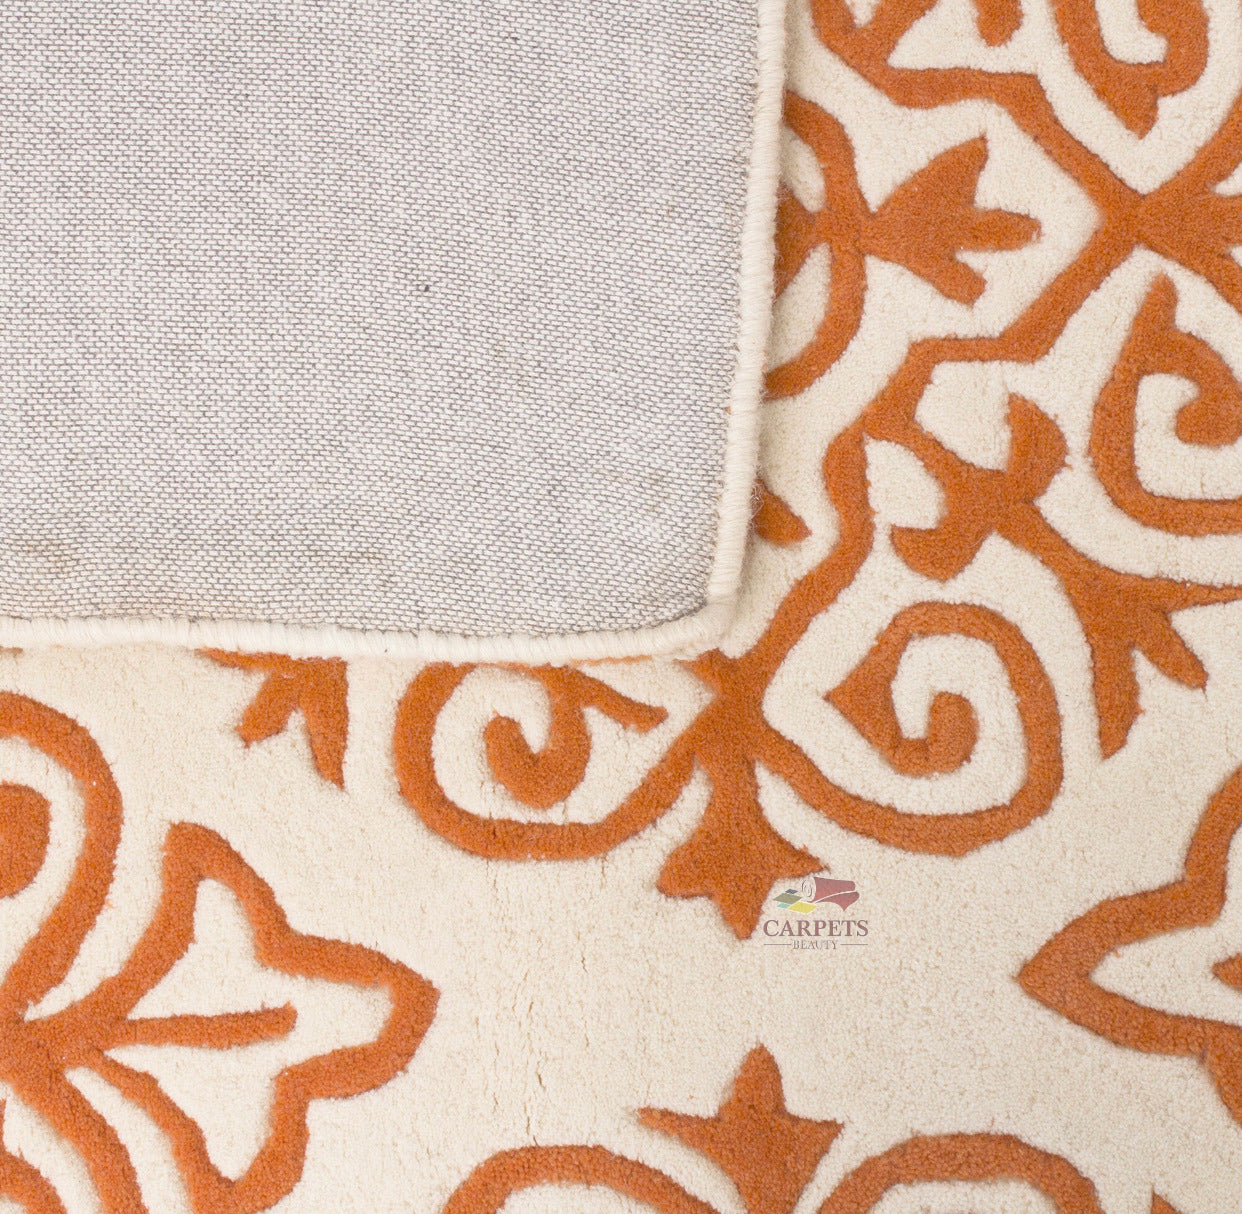 Orange white Floral Carpets for bedrooms and living rooms